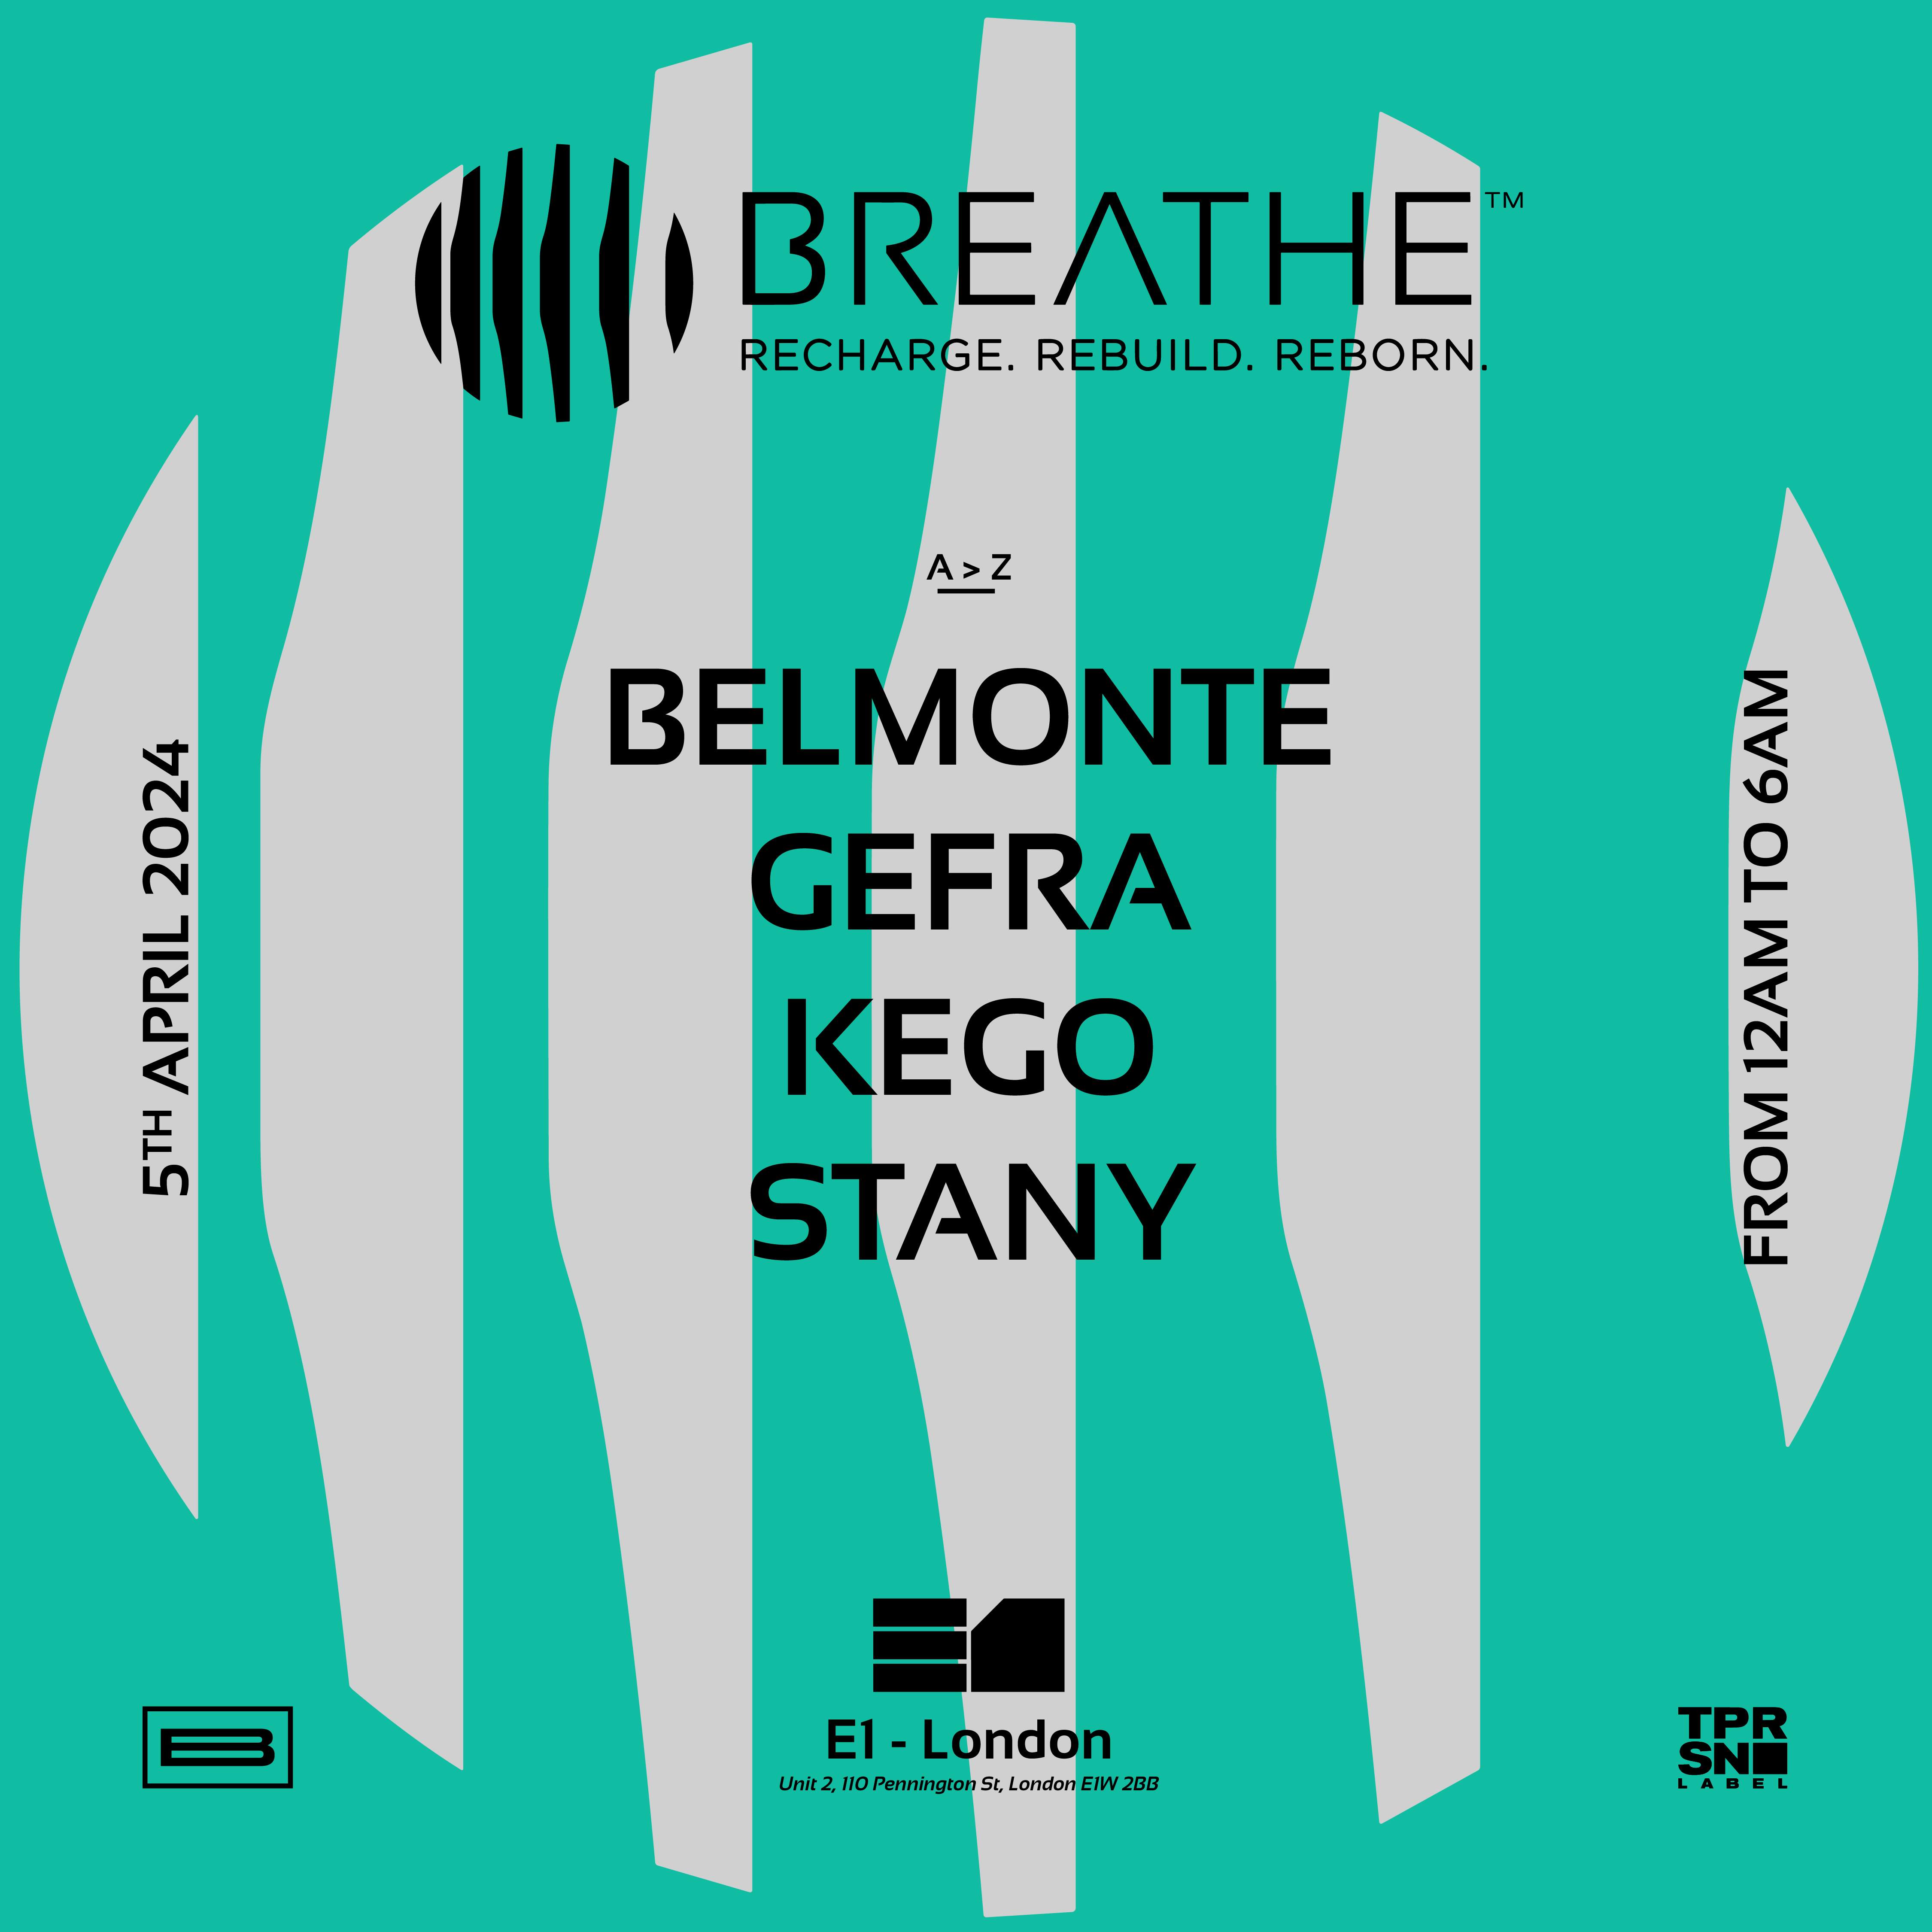 BREATHE: Opening party with Belmonte, Gefra, Kego, Stany - Página trasera